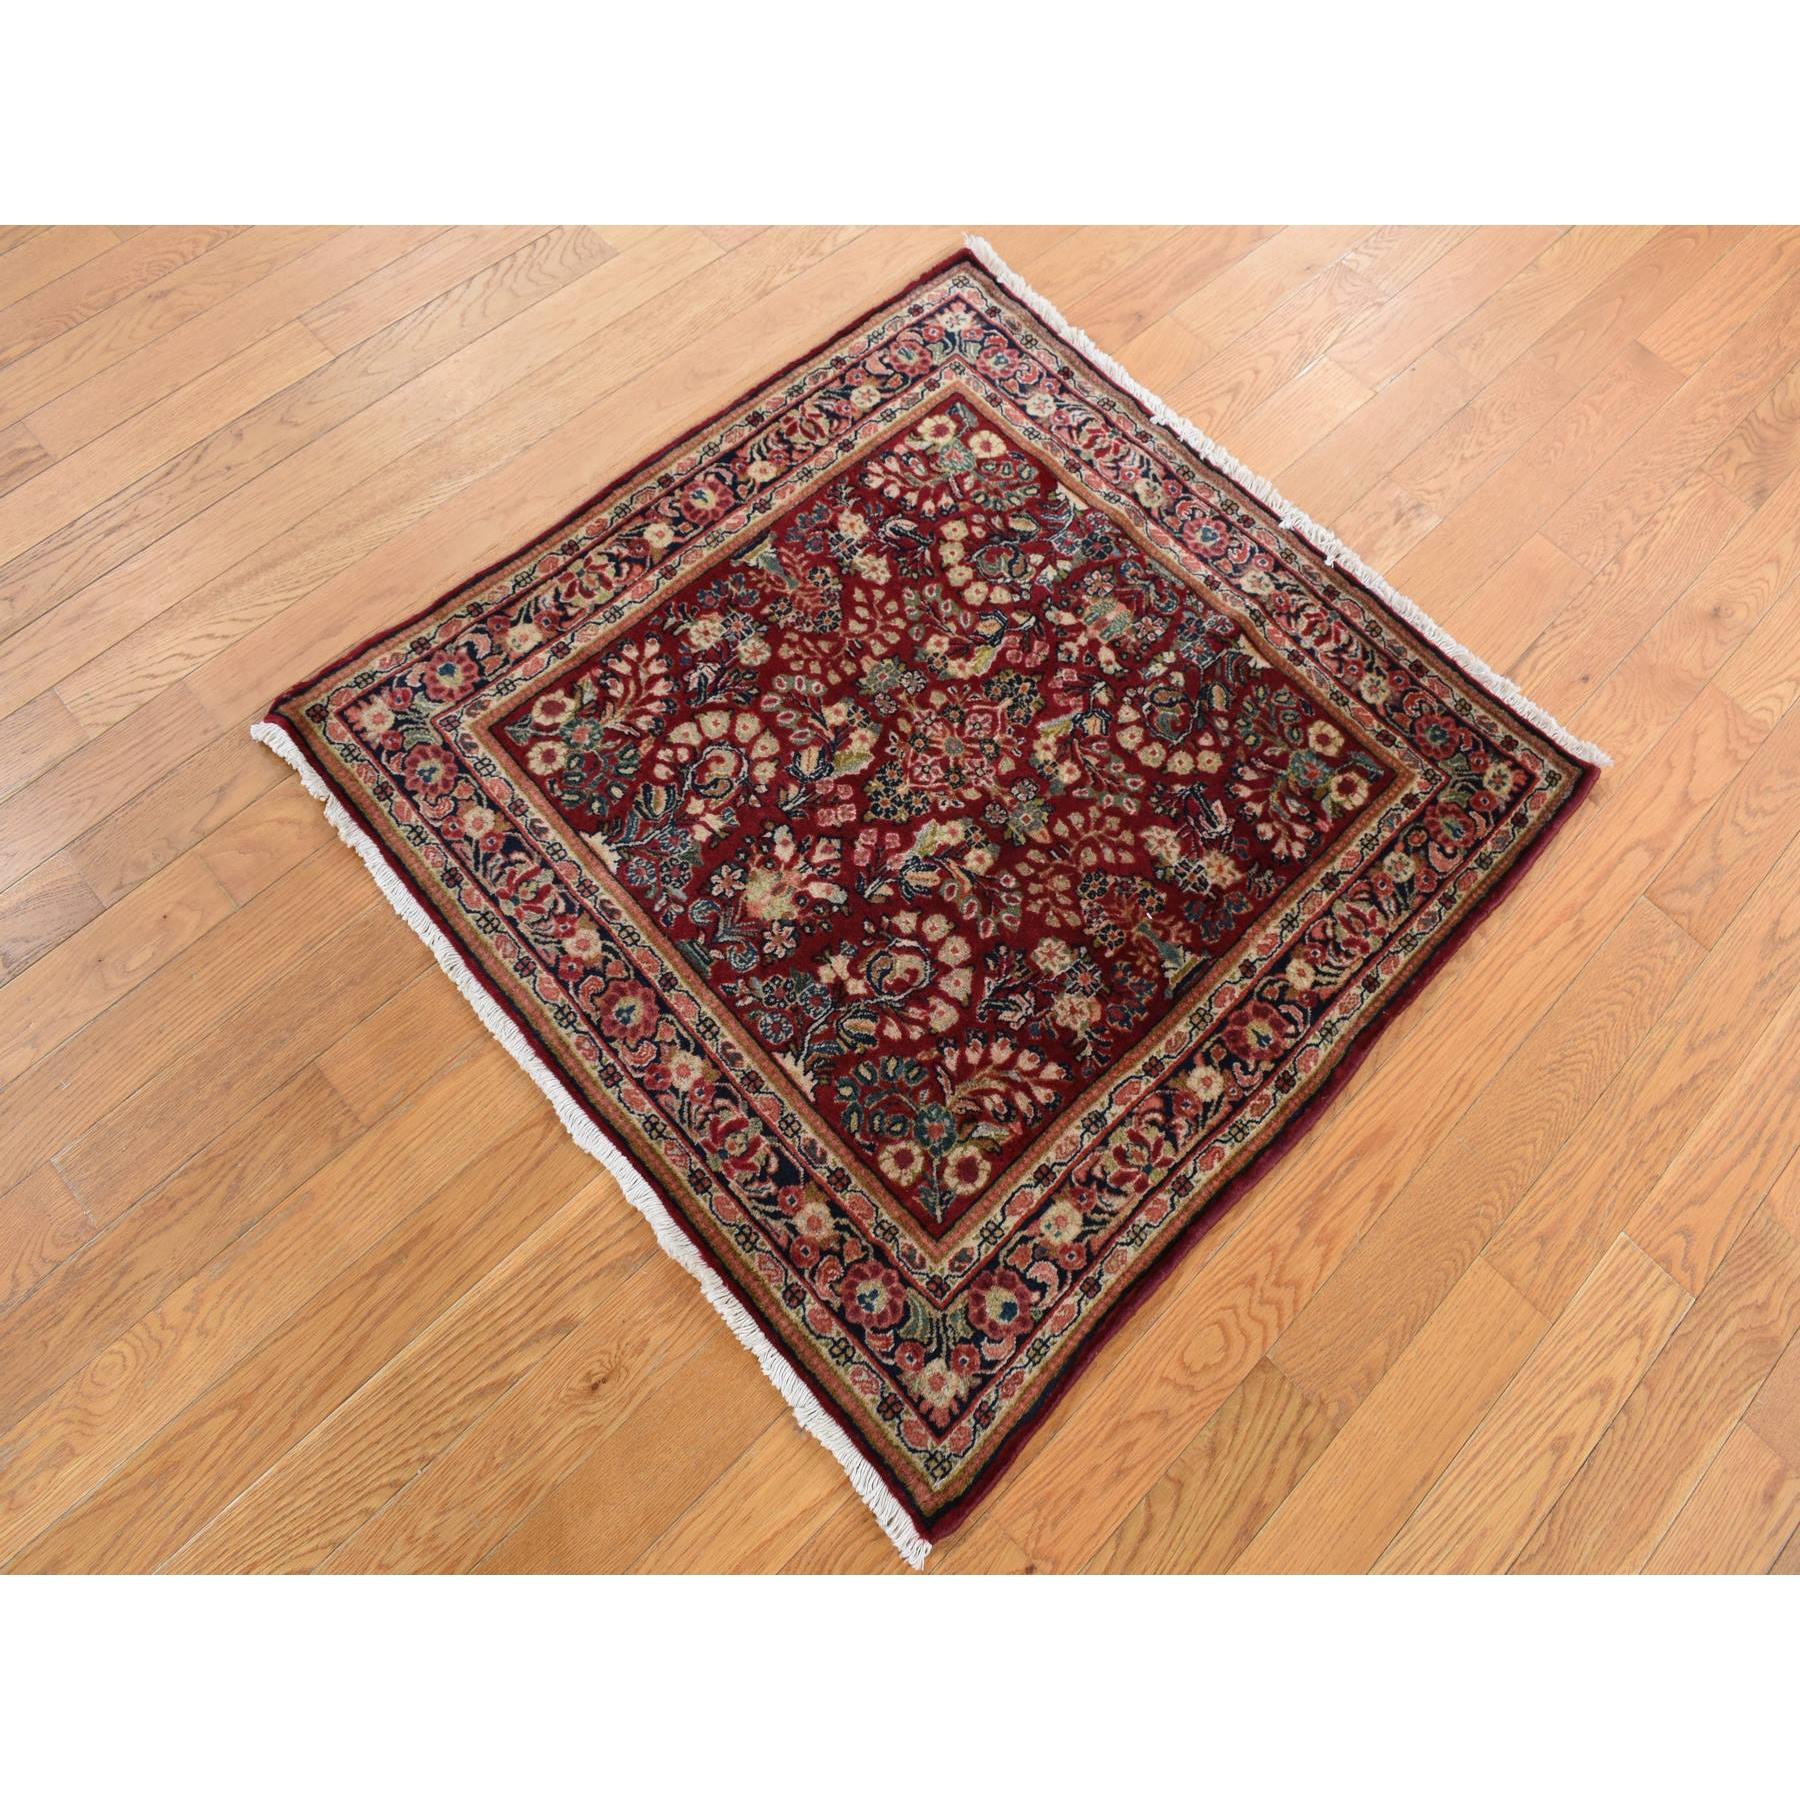 This fabulous Hand-Knotted carpet has been created and designed for extra strength and durability. This rug has been handcrafted for weeks in the traditional method that is used to make
Exact Rug Size in Feet and Inches : 3' x 3'
Main Rug Color :